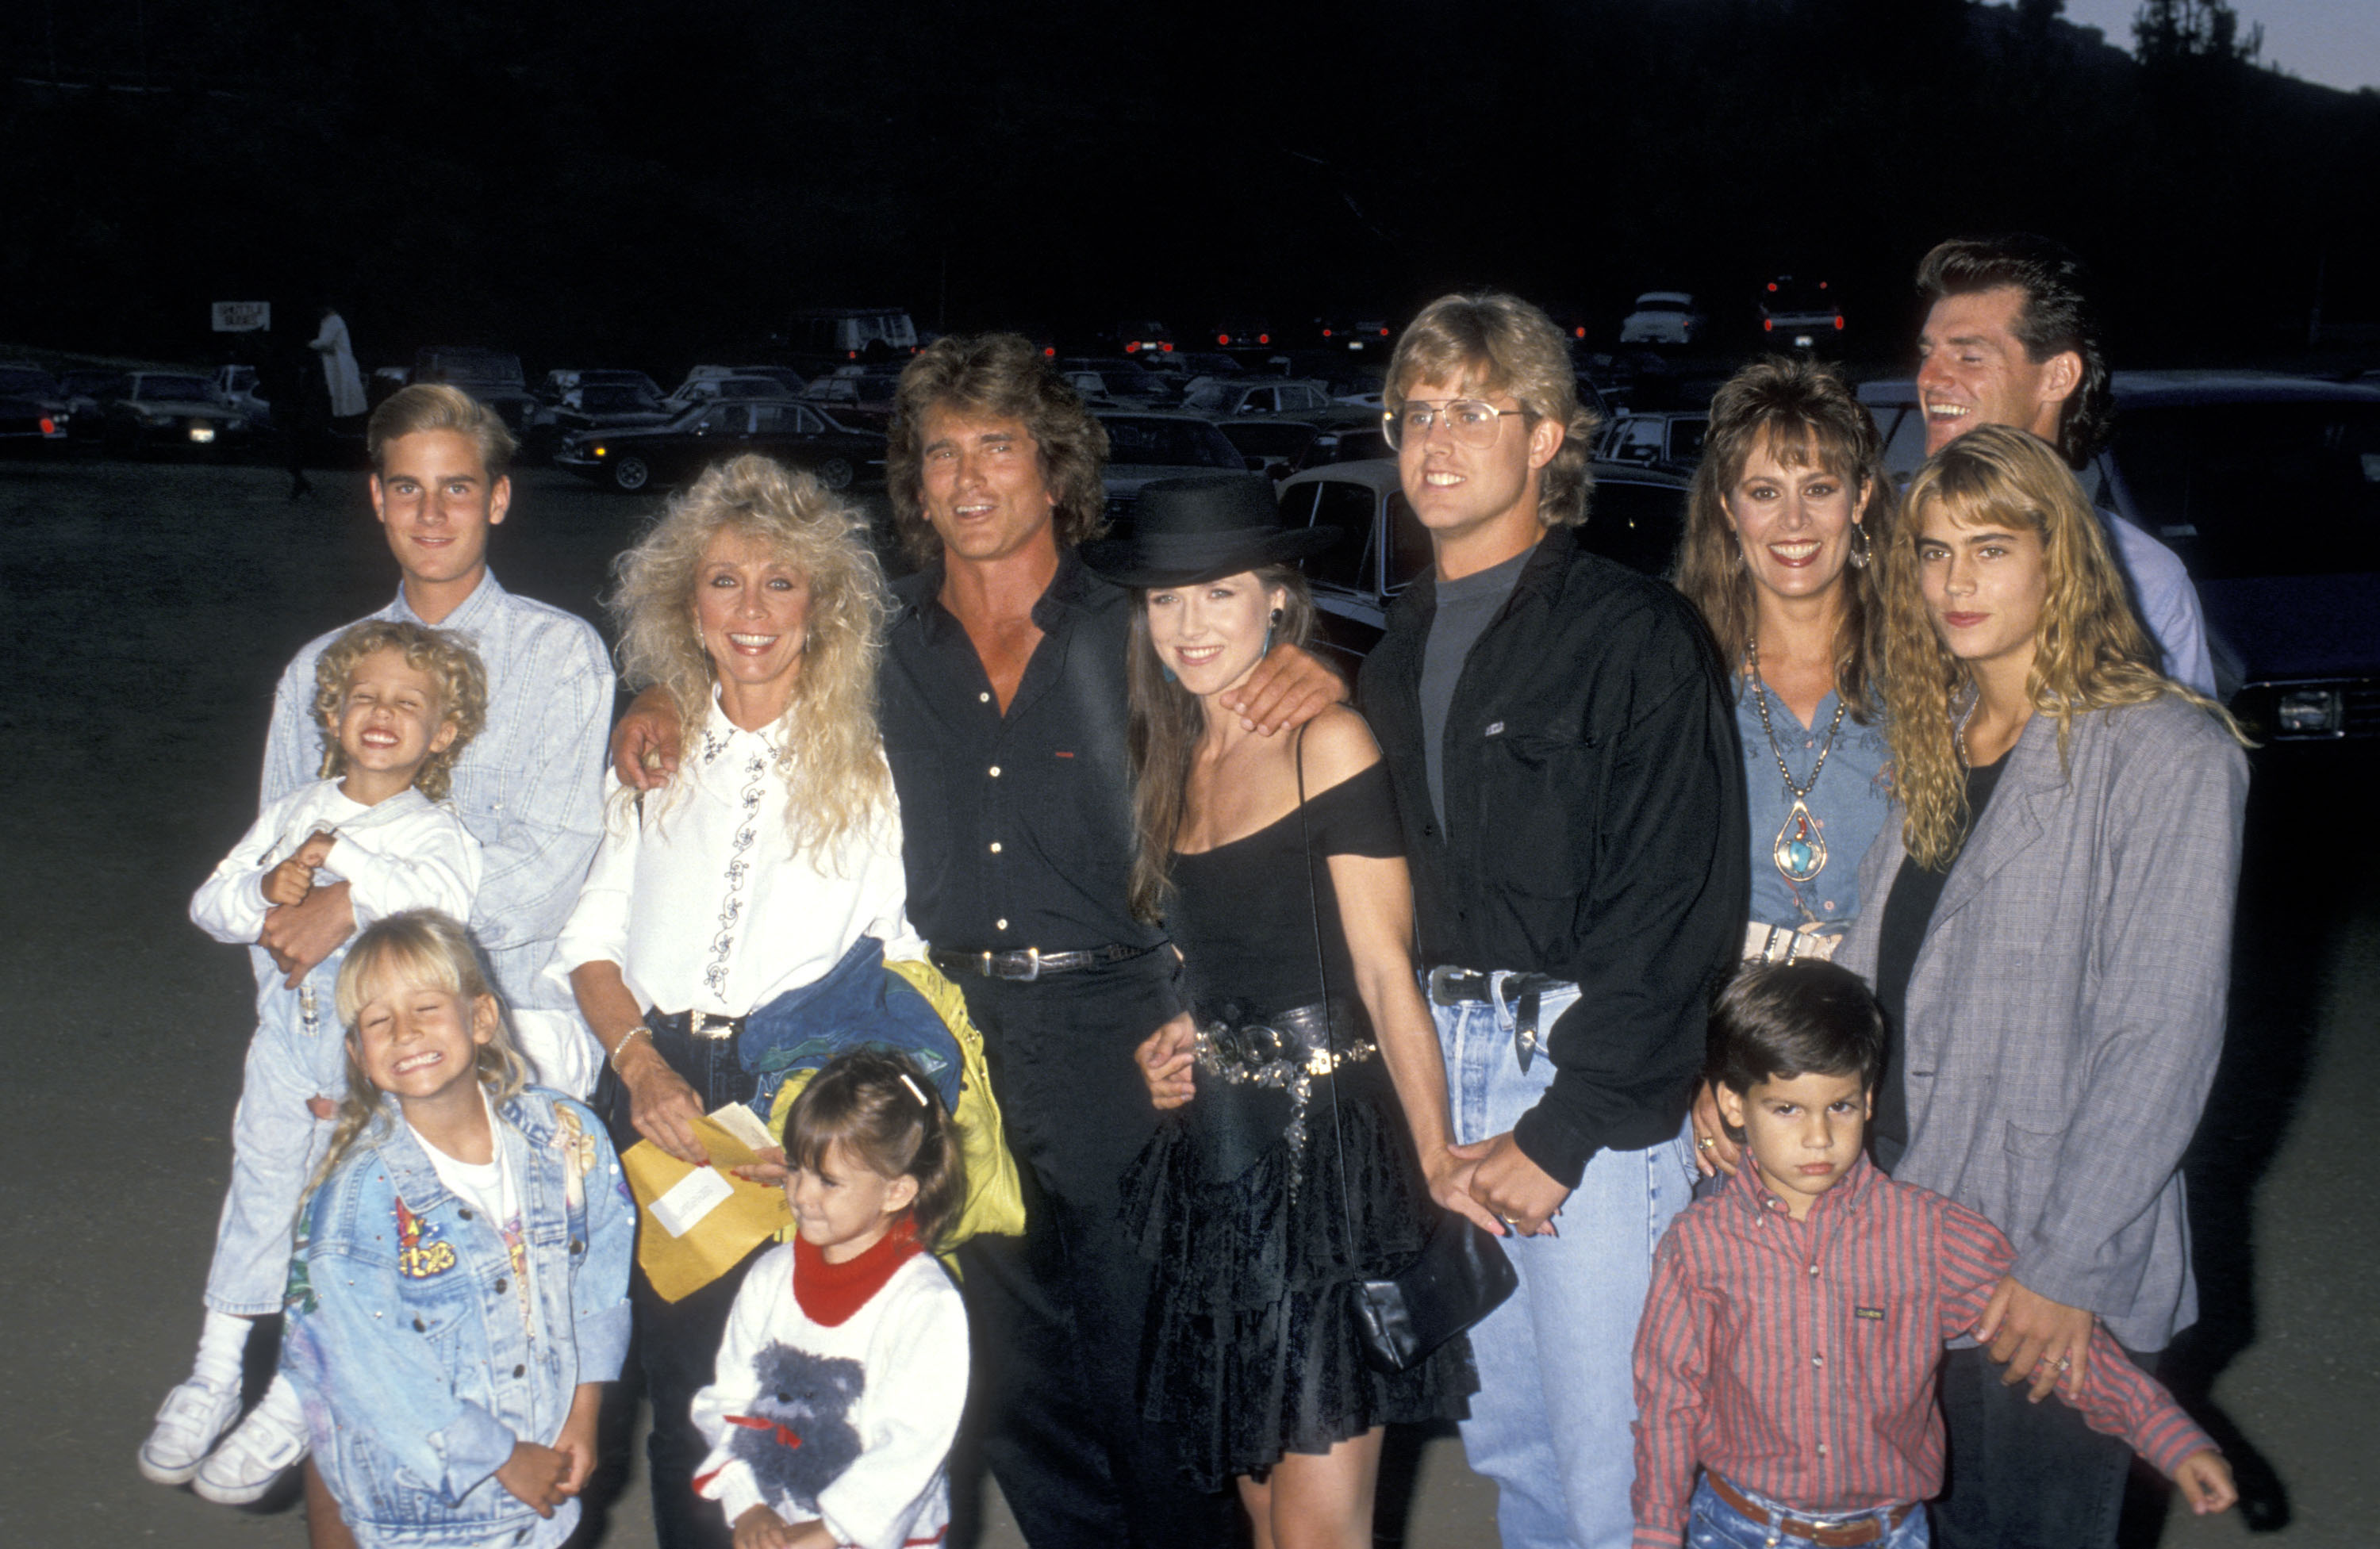 Christopher Landon and date, with Sean Landon, Jennifer Landon, Cindy Clerico, actor Michael Landon, Michael Landon Jr. and date, Mark Landon, Leslie Landon and Shawna Landon at the Third Annual Moonlight Roundup on July 29, 1989, at Calamigos Ranch in Malibu, California. | Source: Getty Images